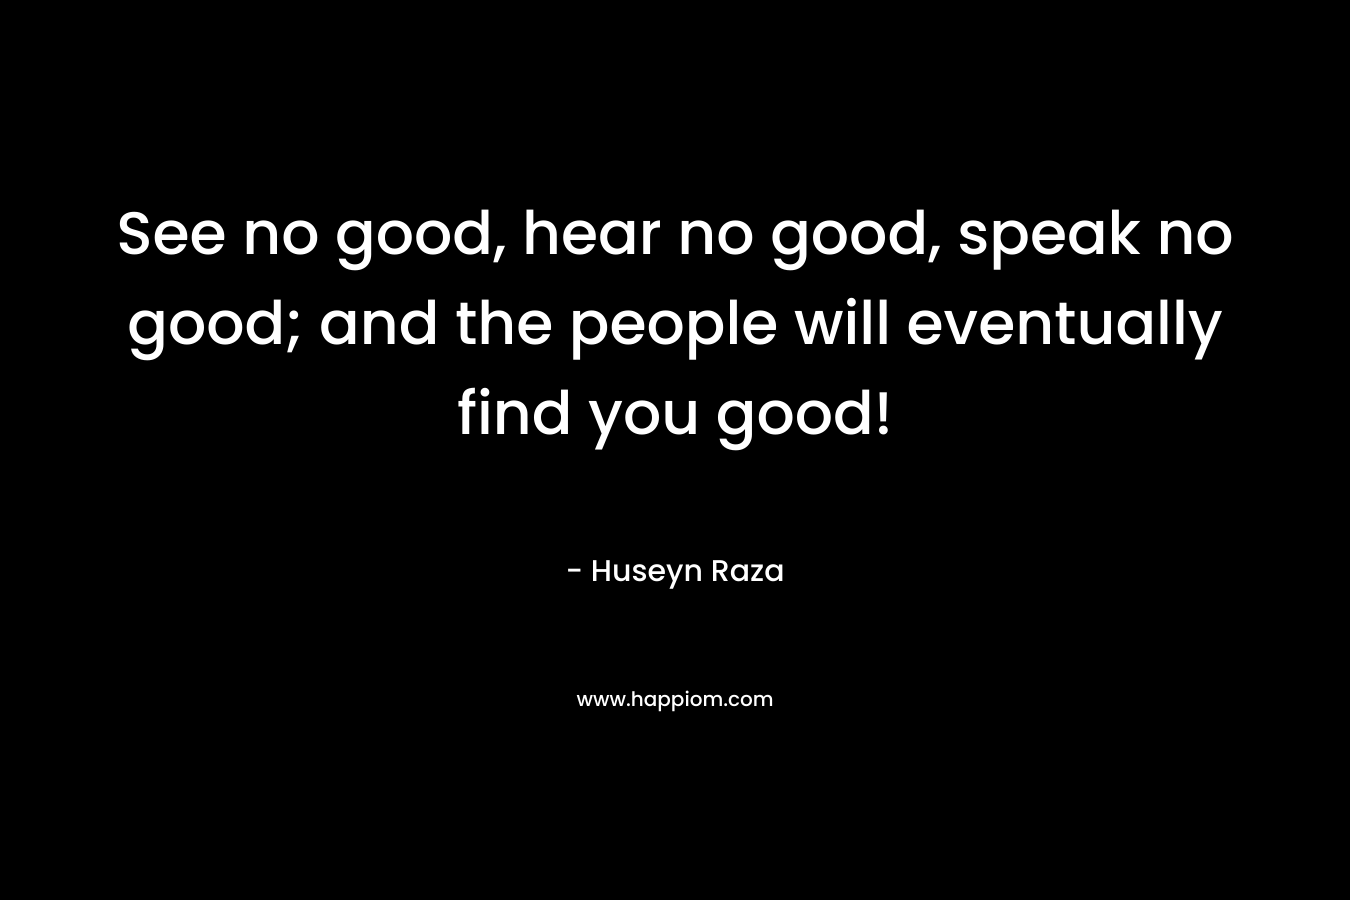 See no good, hear no good, speak no good; and the people will eventually find you good! – Huseyn Raza